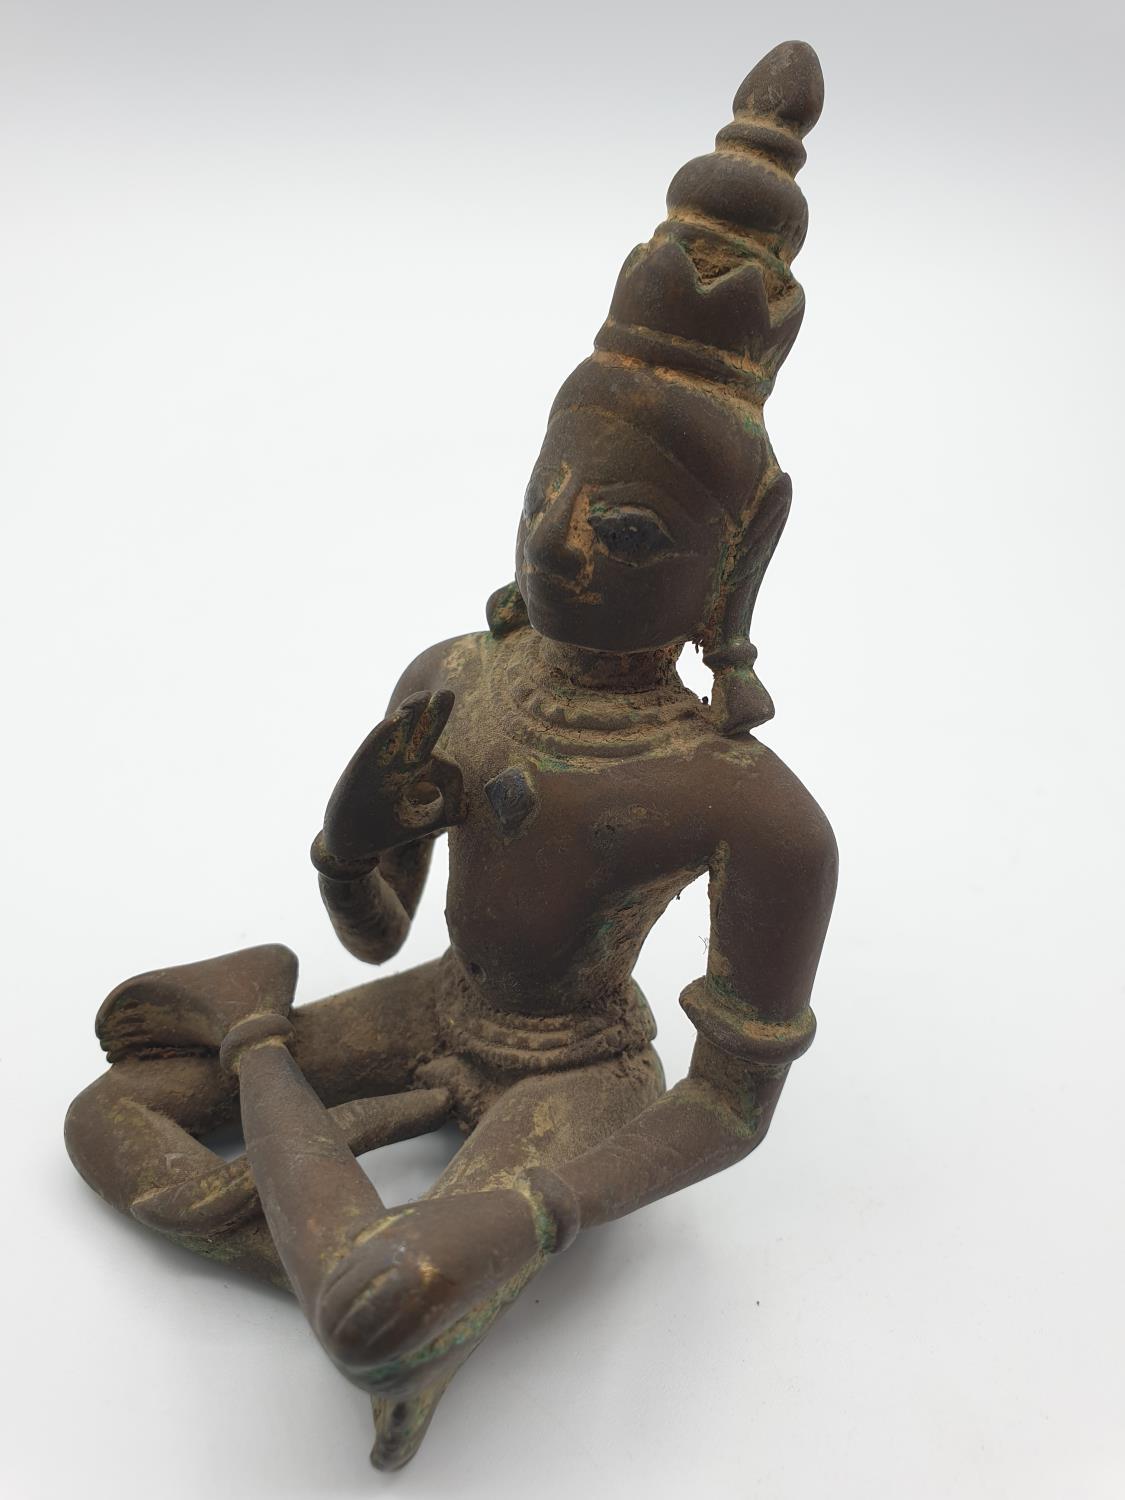 Late 18th century Oriental religious figure in bronze with gilt finish mostly worn off with age, 9cm - Image 3 of 9